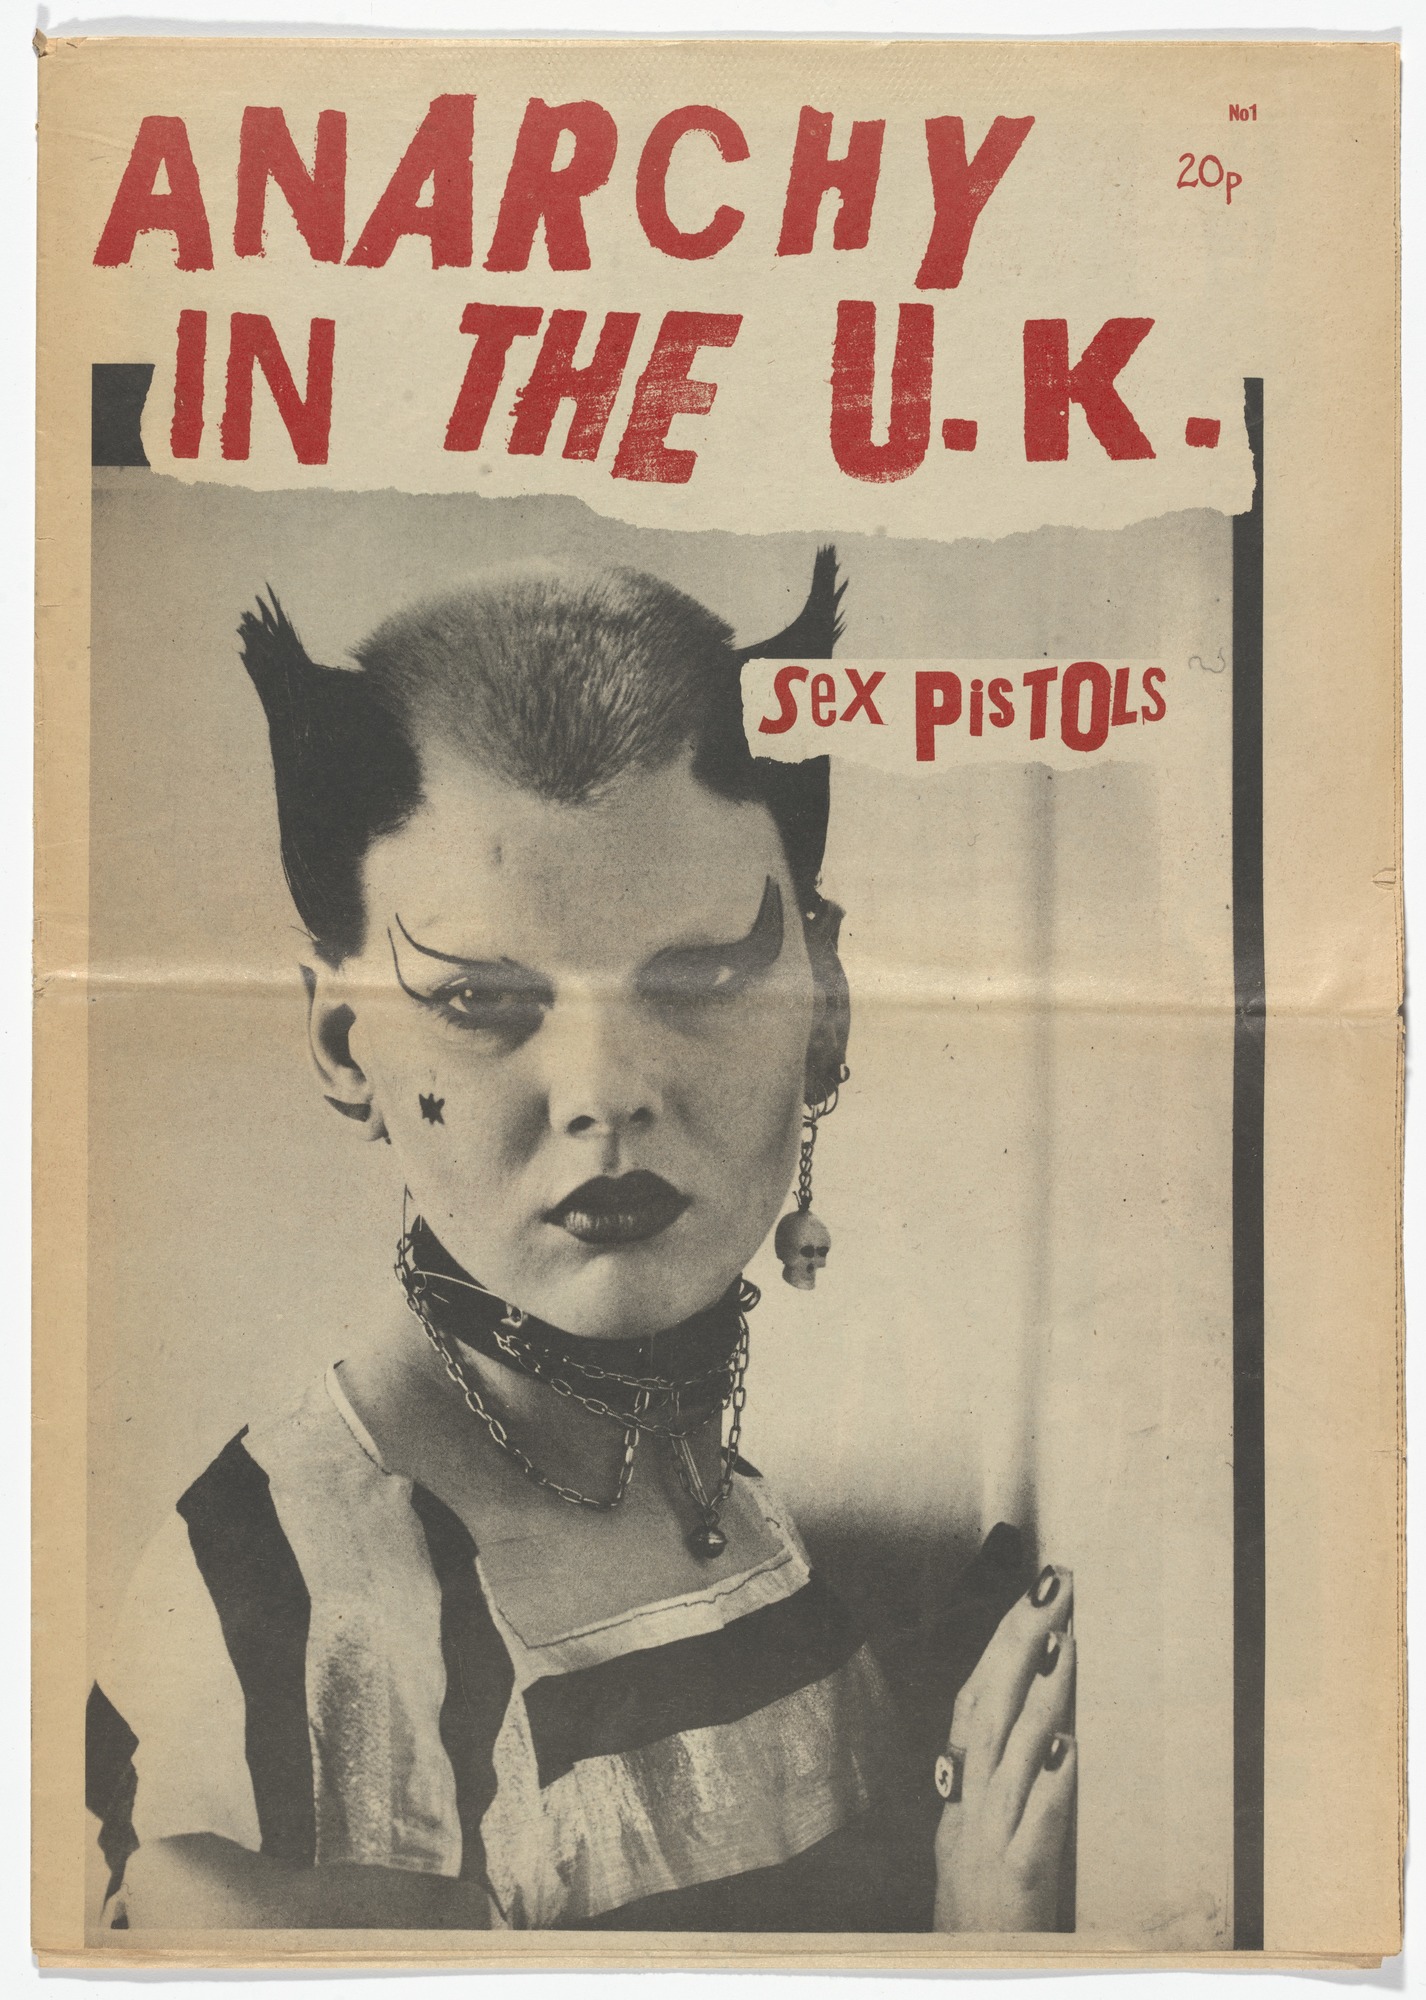 'Anarchy in the UK' by the Sex Pistols